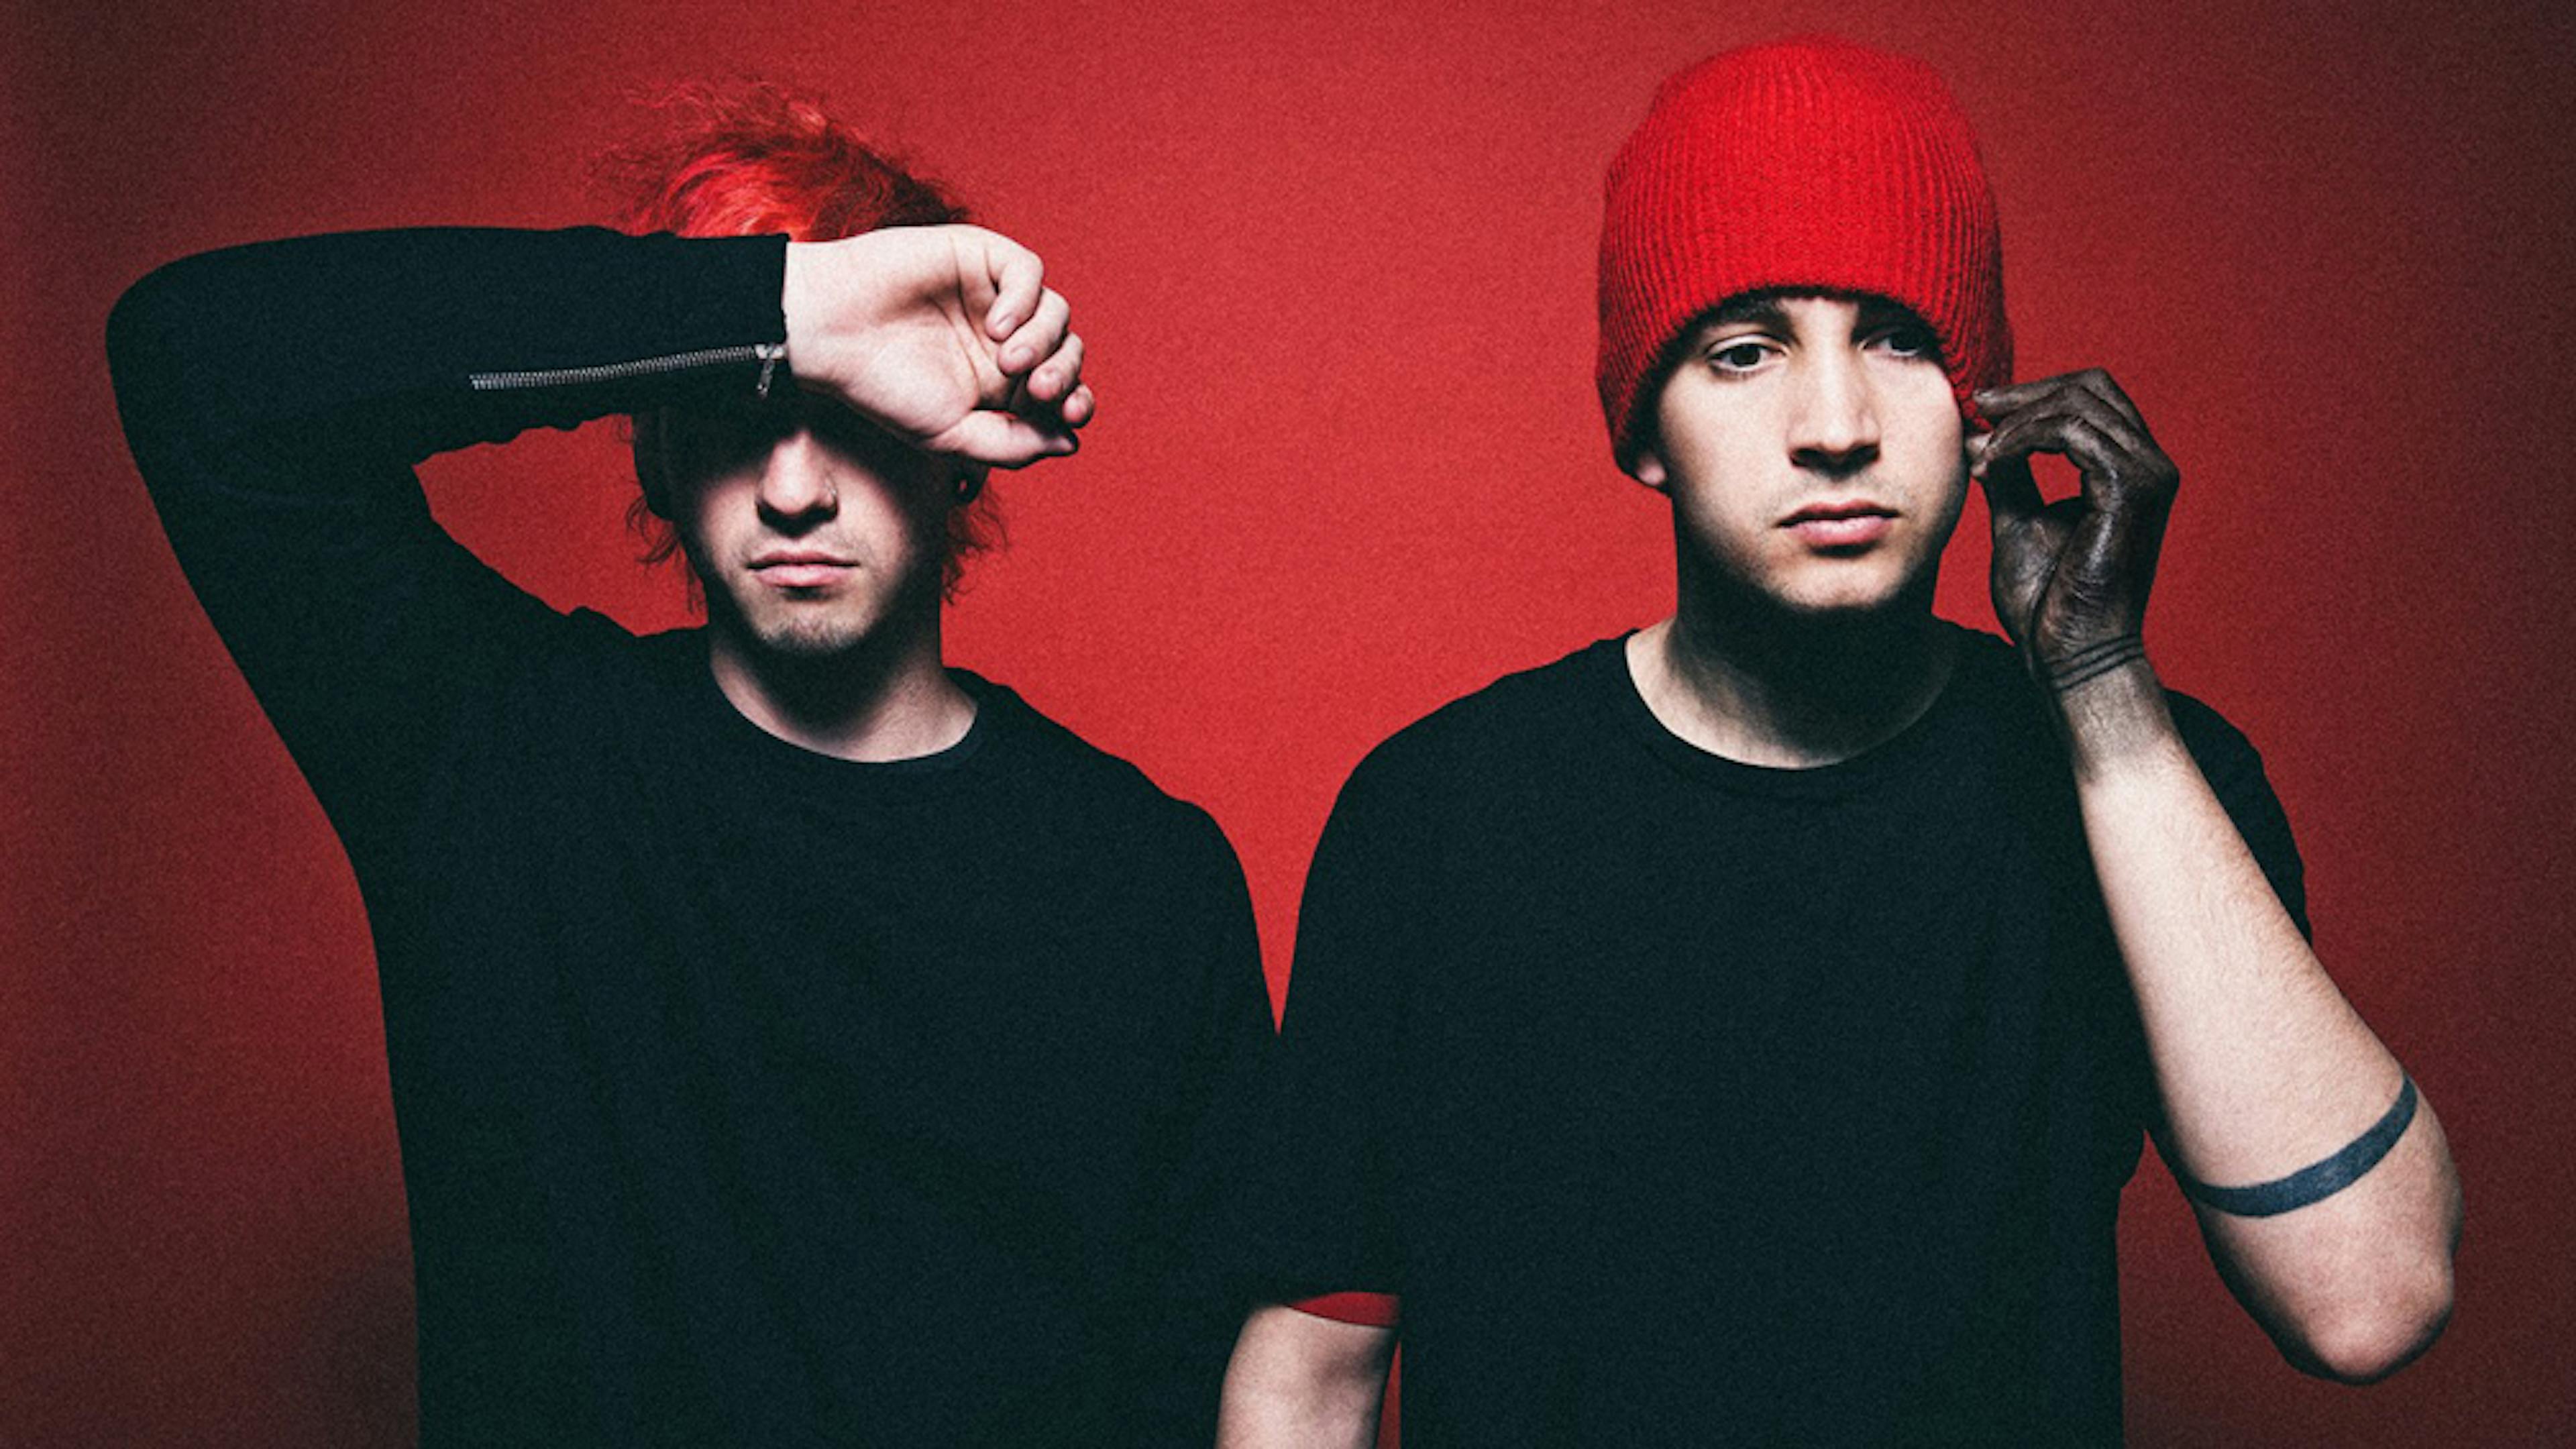 Author Ryan Bird announces authorised twenty one pilots book, The Only Band In The World